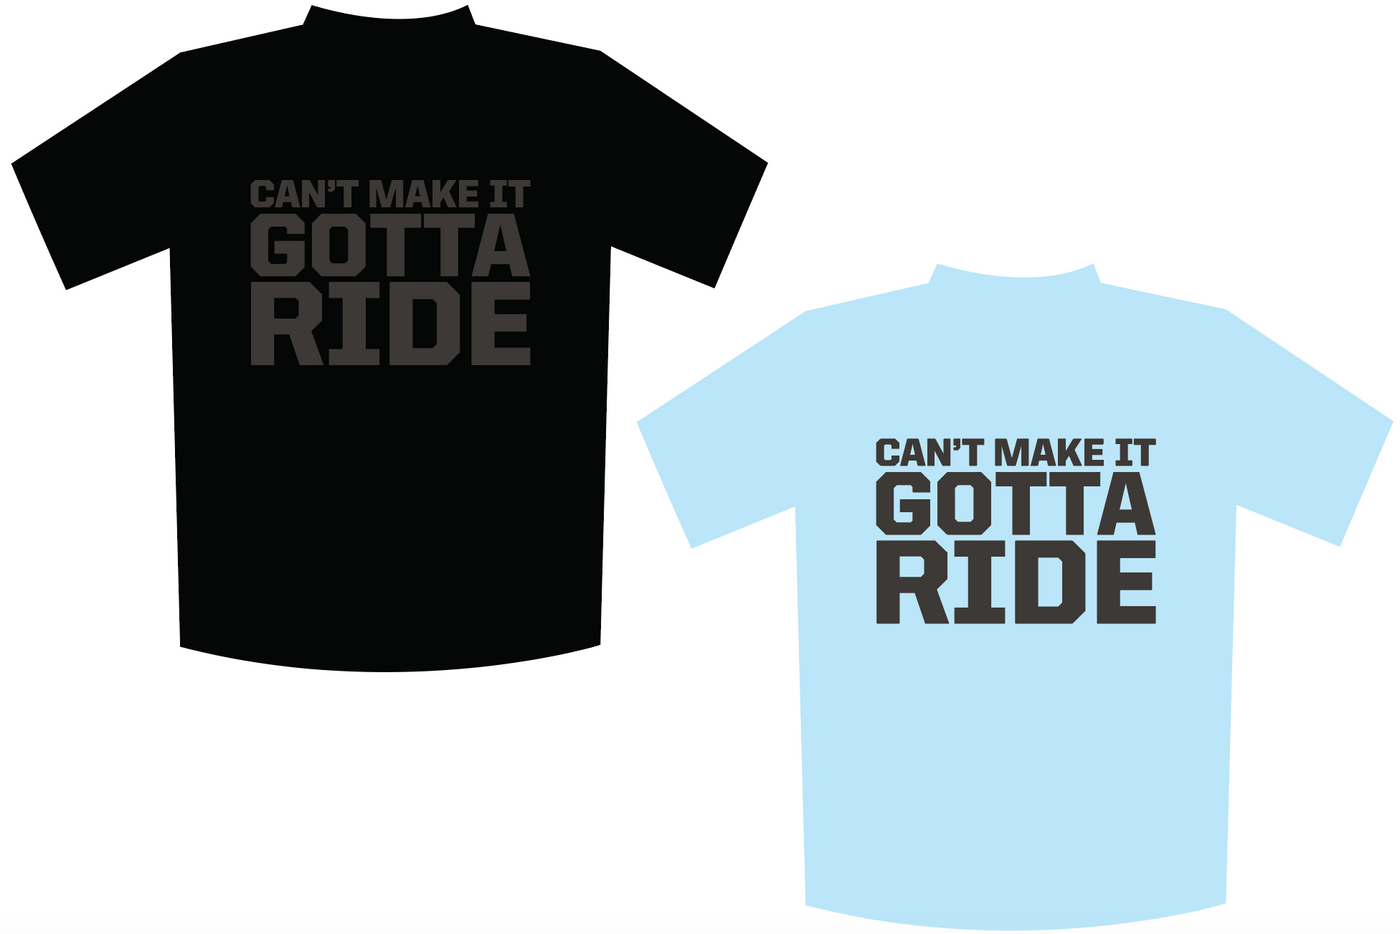 GOTTA RIDE T-SHIRT - AVAIL IN 2 COLORS